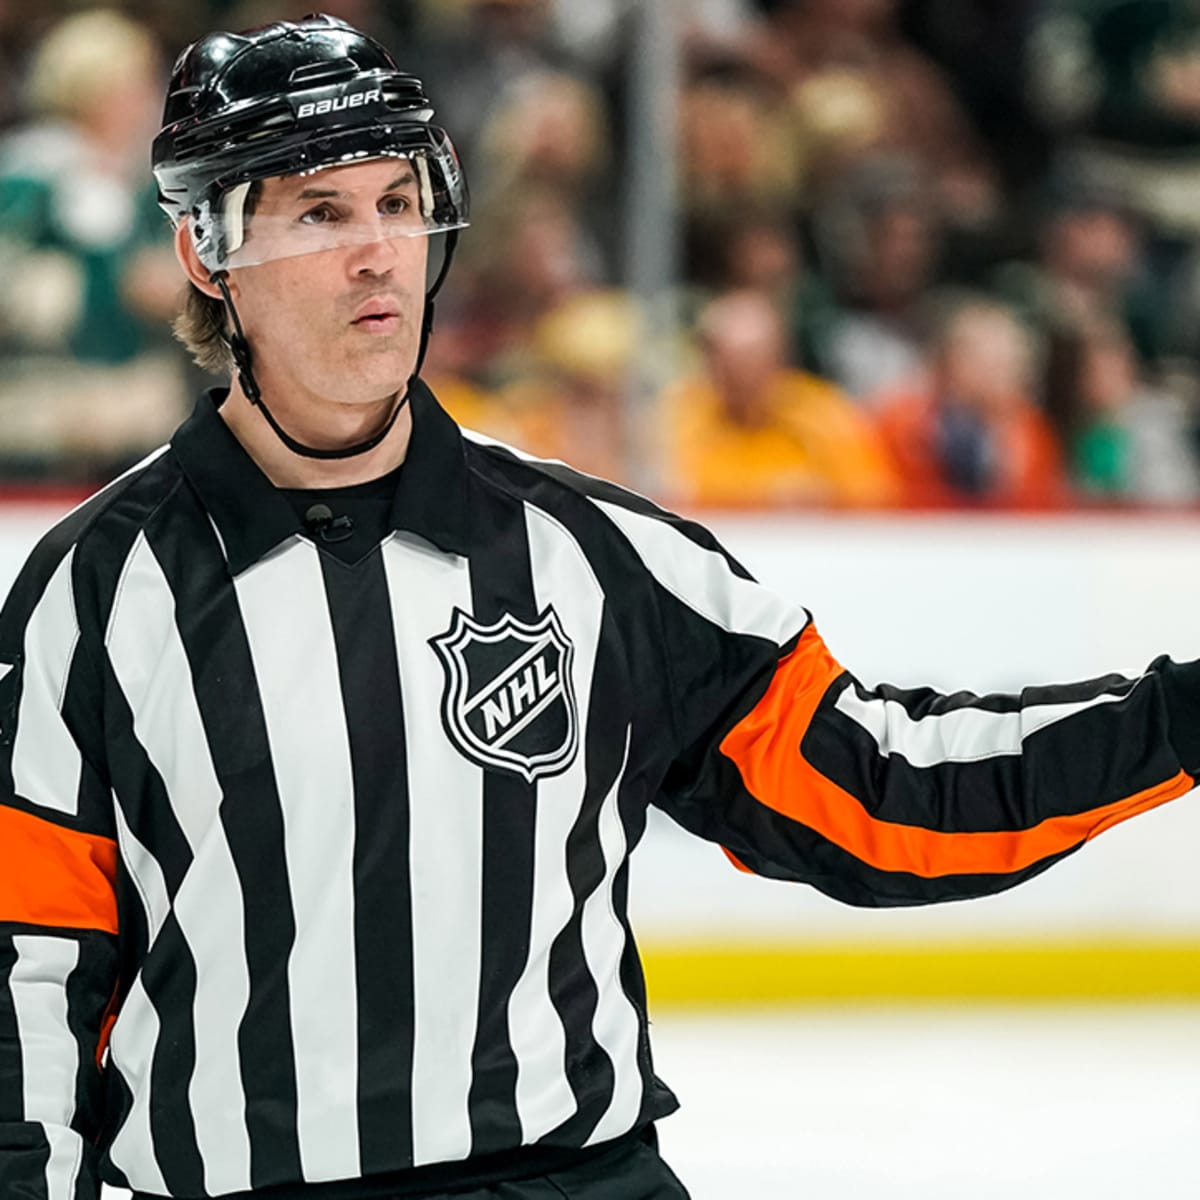 NHL referee Wes McCauley skates with the name Mick on his jersey